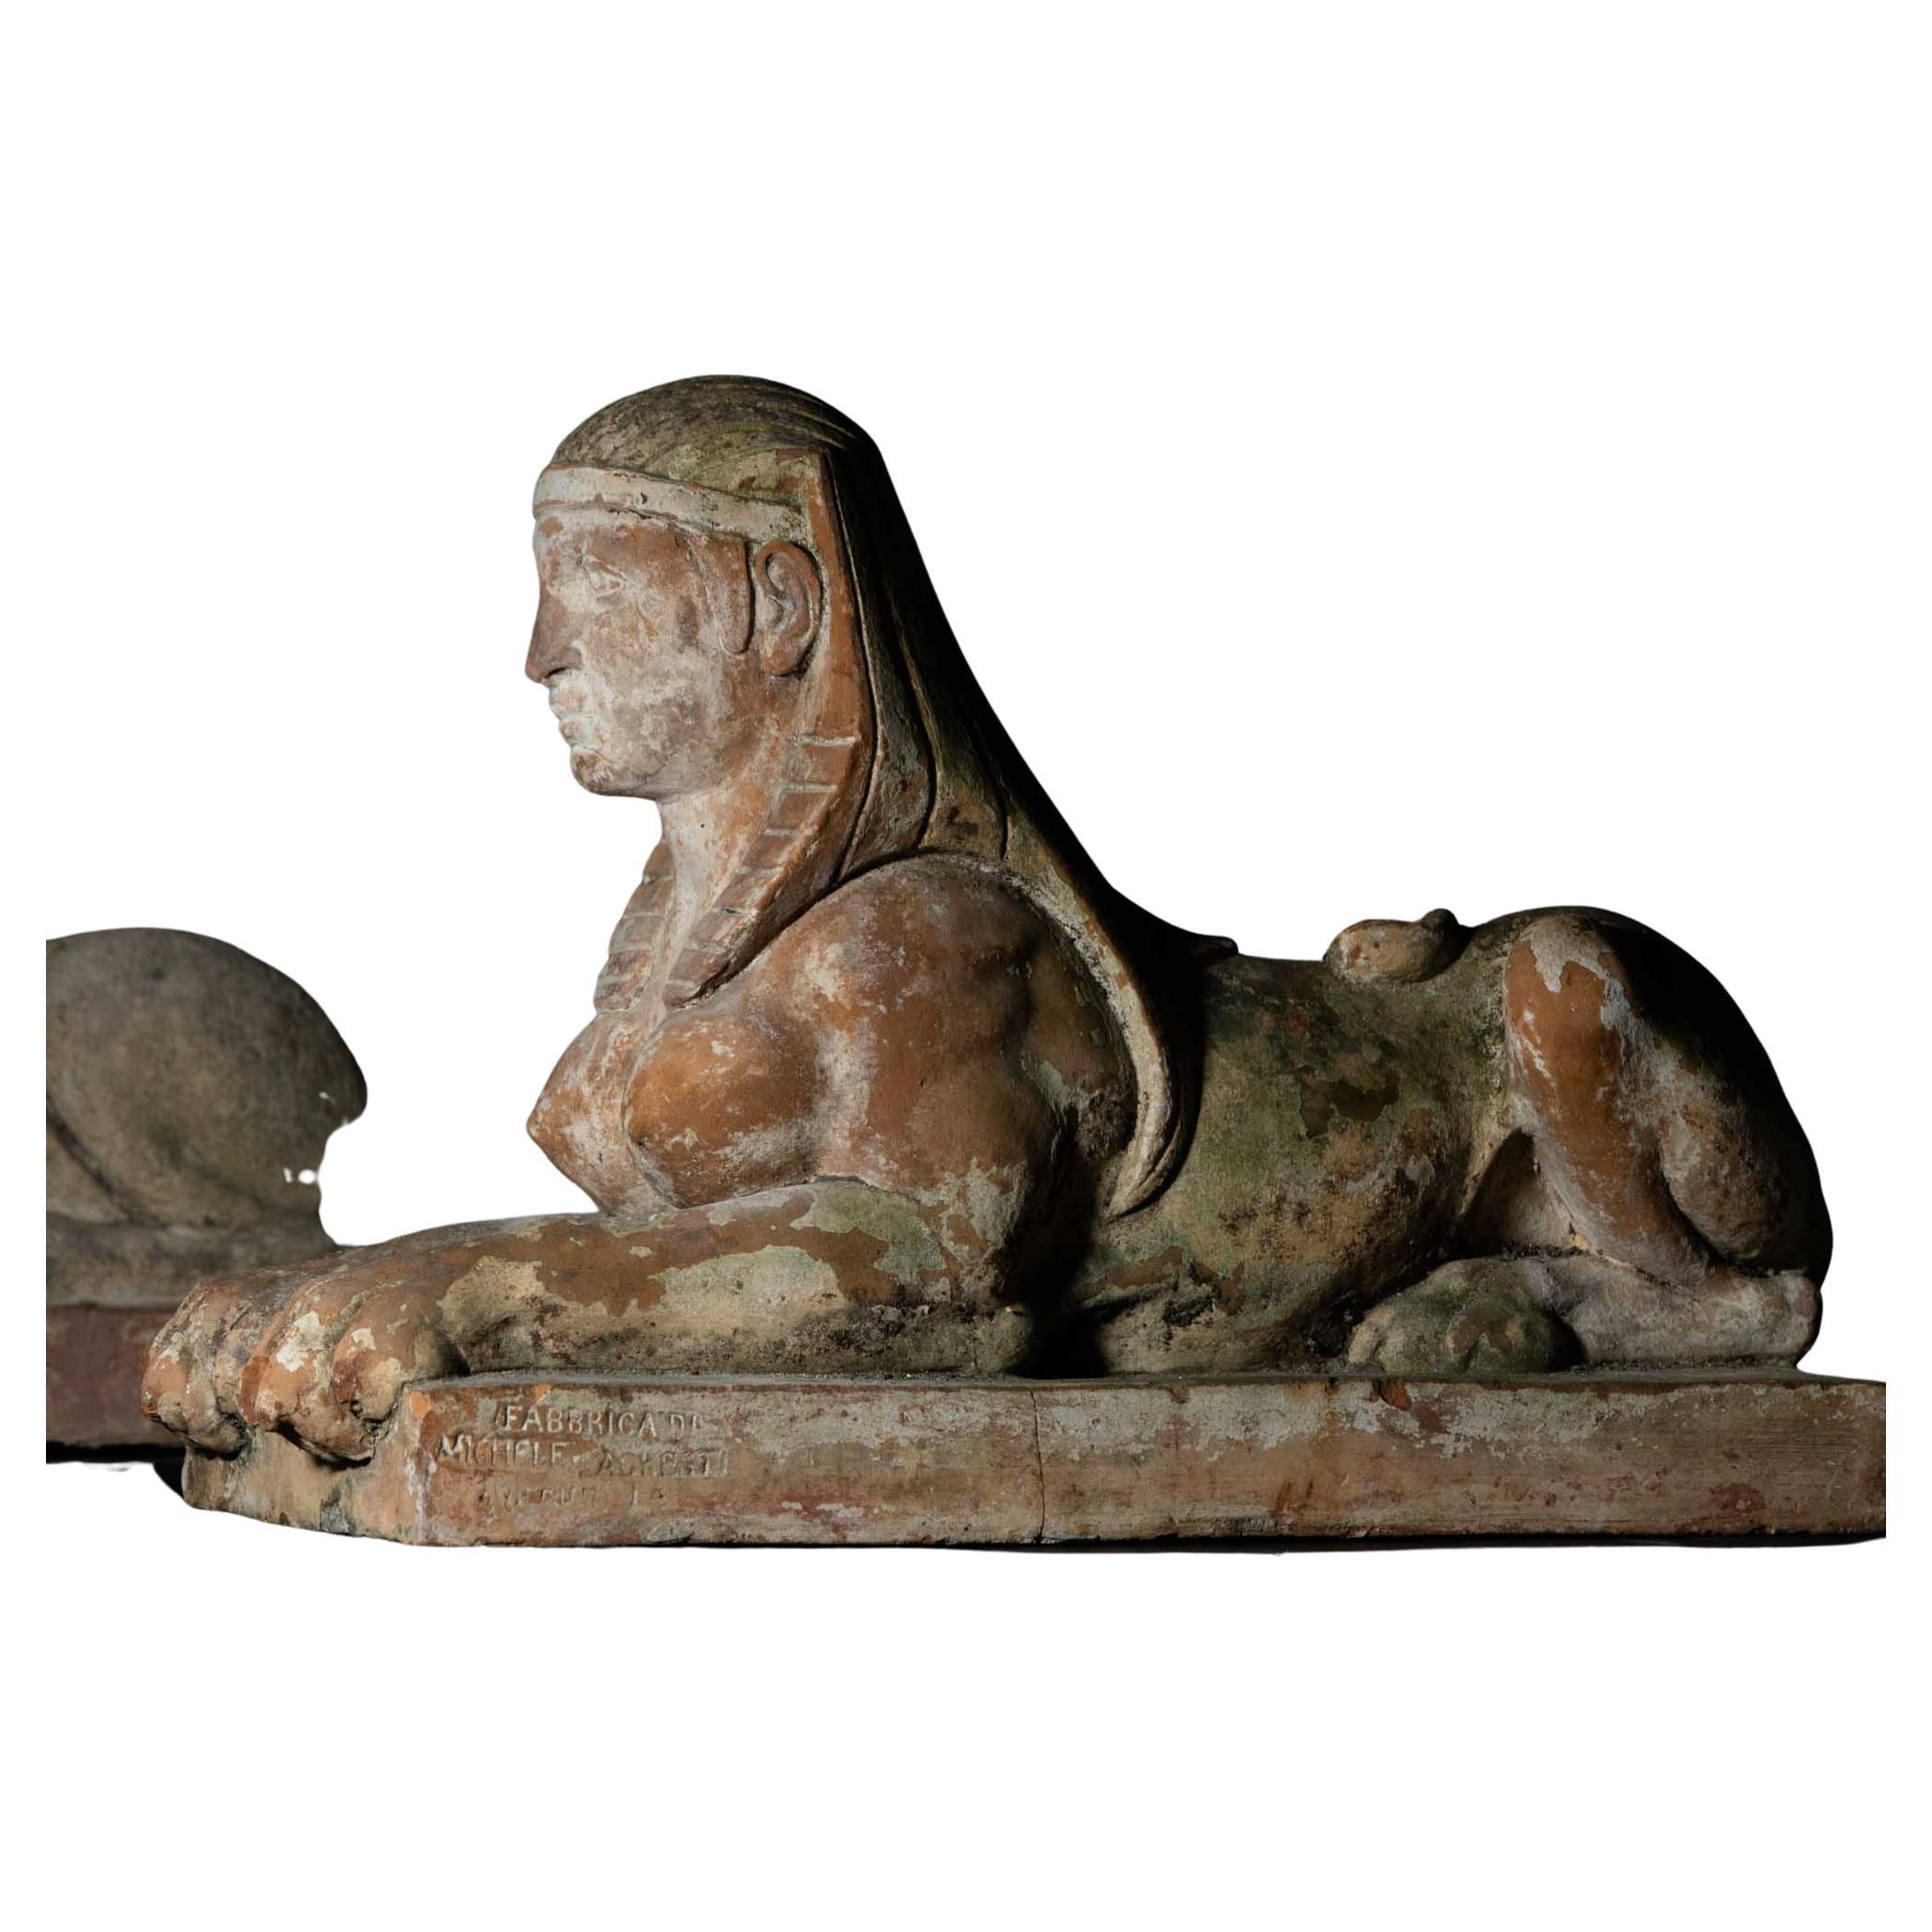 Pair of Italian terracotta sphinxes in the Egyptian style. Each sphinx is stamped on the side: Fabbricato Michele Agresti, Firenze. Unrestored patina condition. The Agresti family is a well-known pottery family from Tuscany, active since the 17th